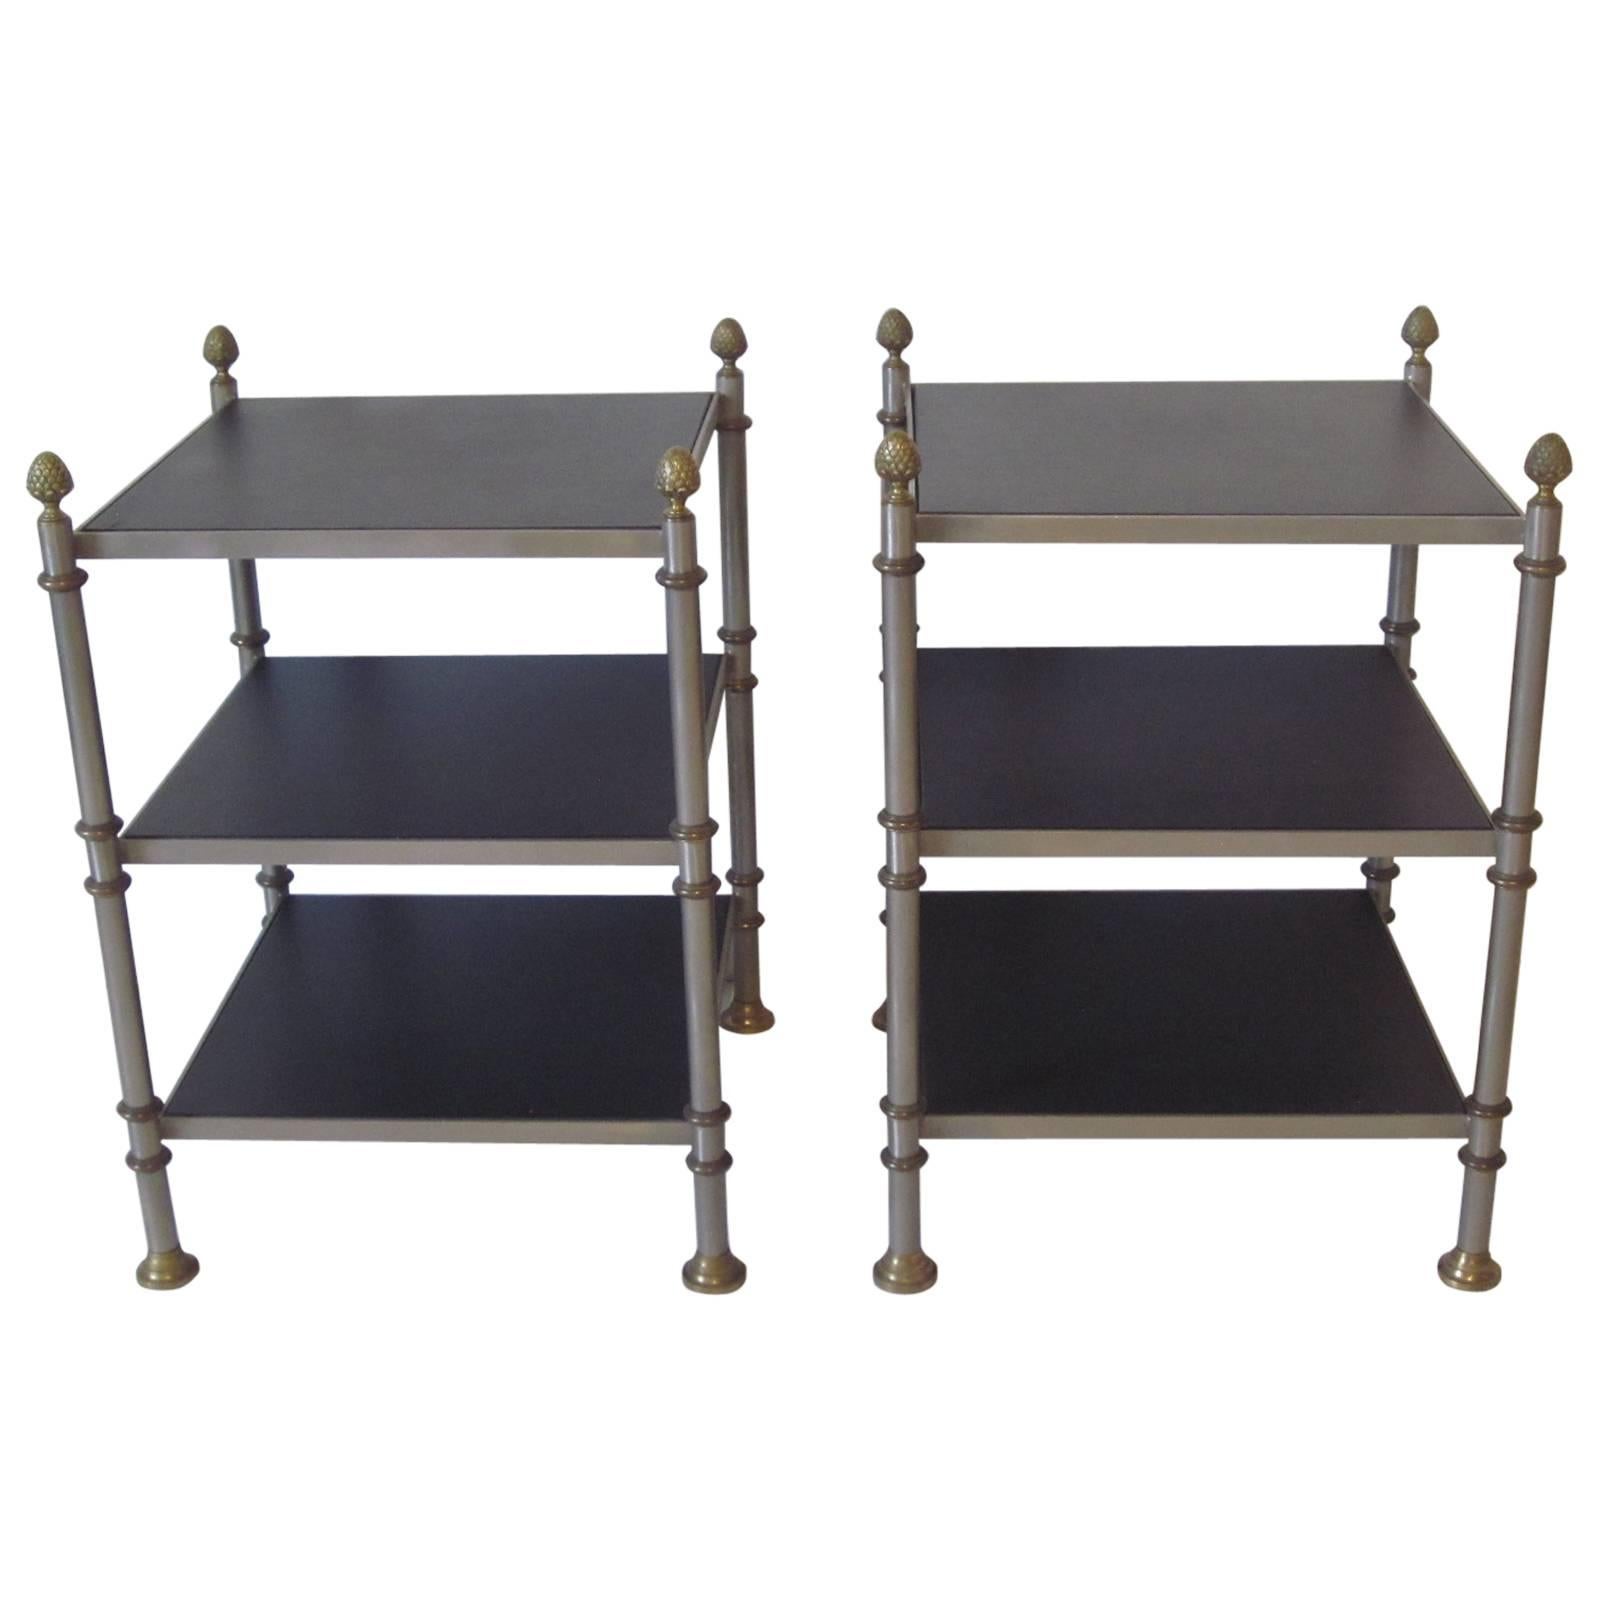 Nightstands or End Tables after Maison Jansen